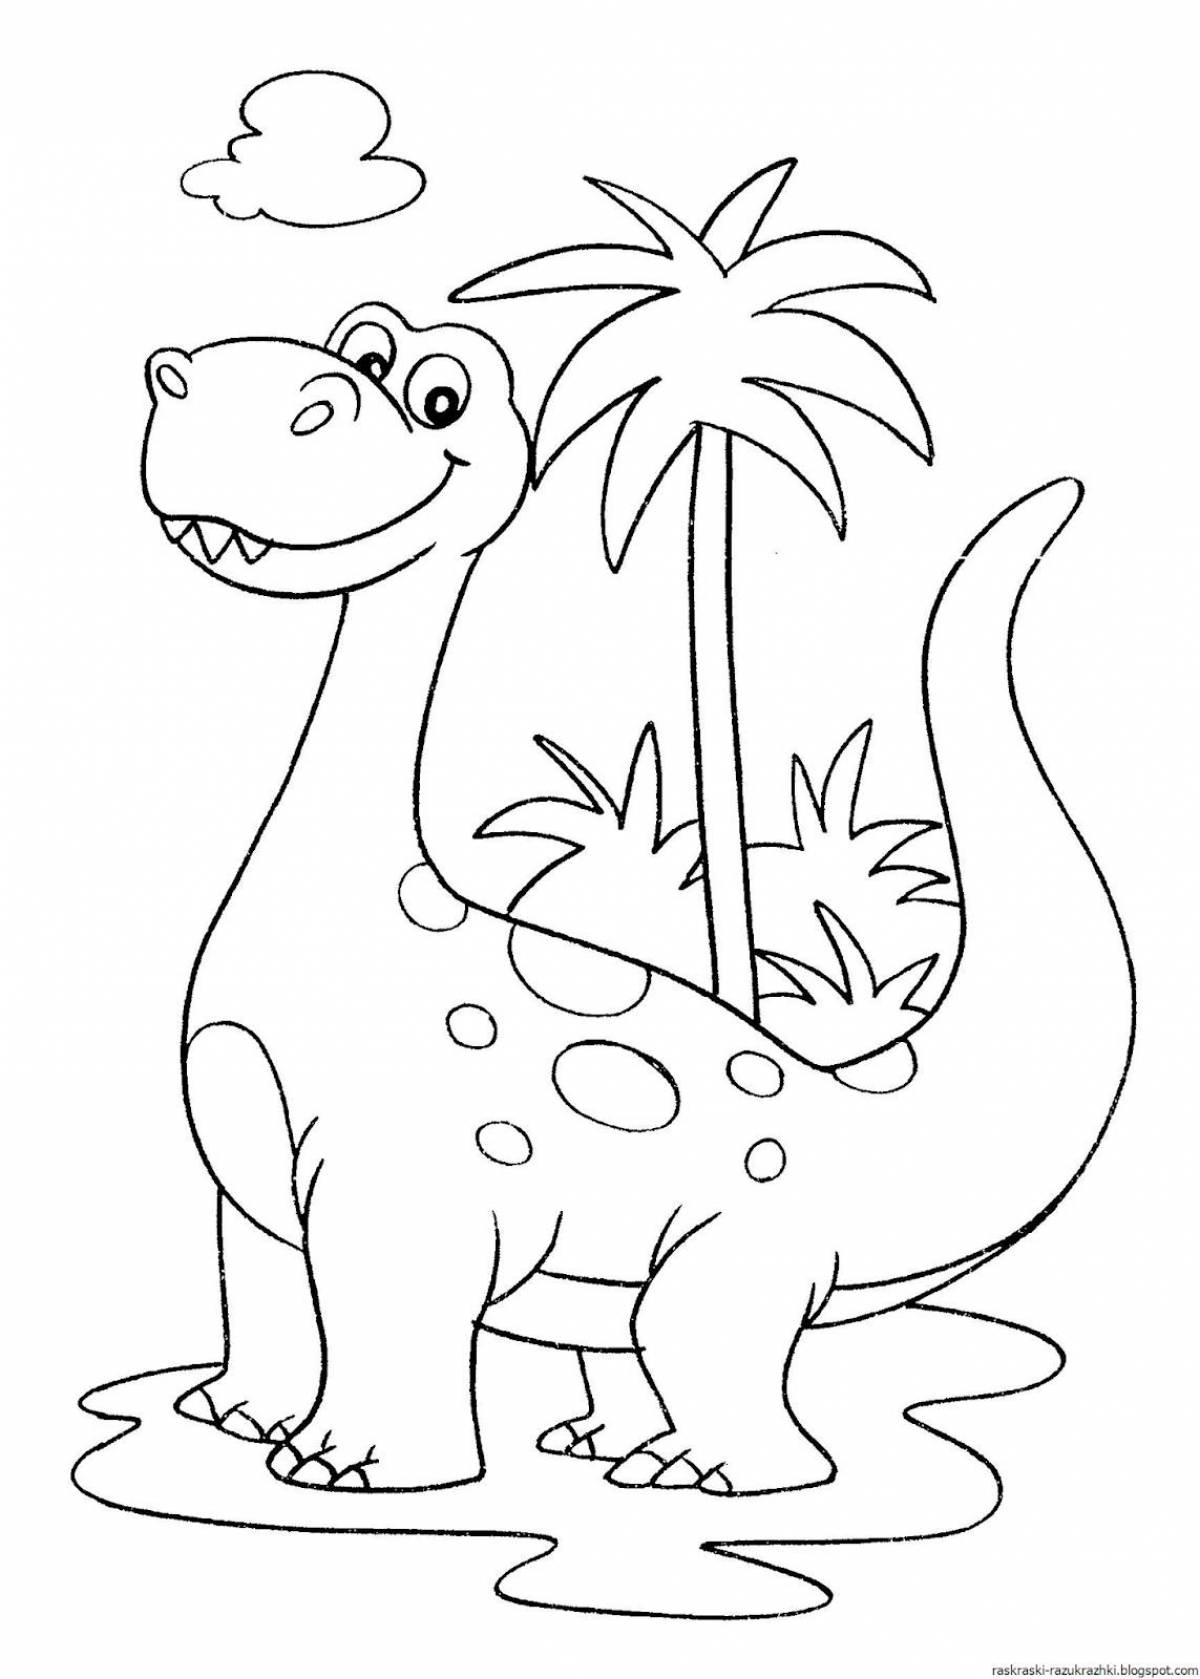 A fun dinosaur coloring book for 4-5 year olds